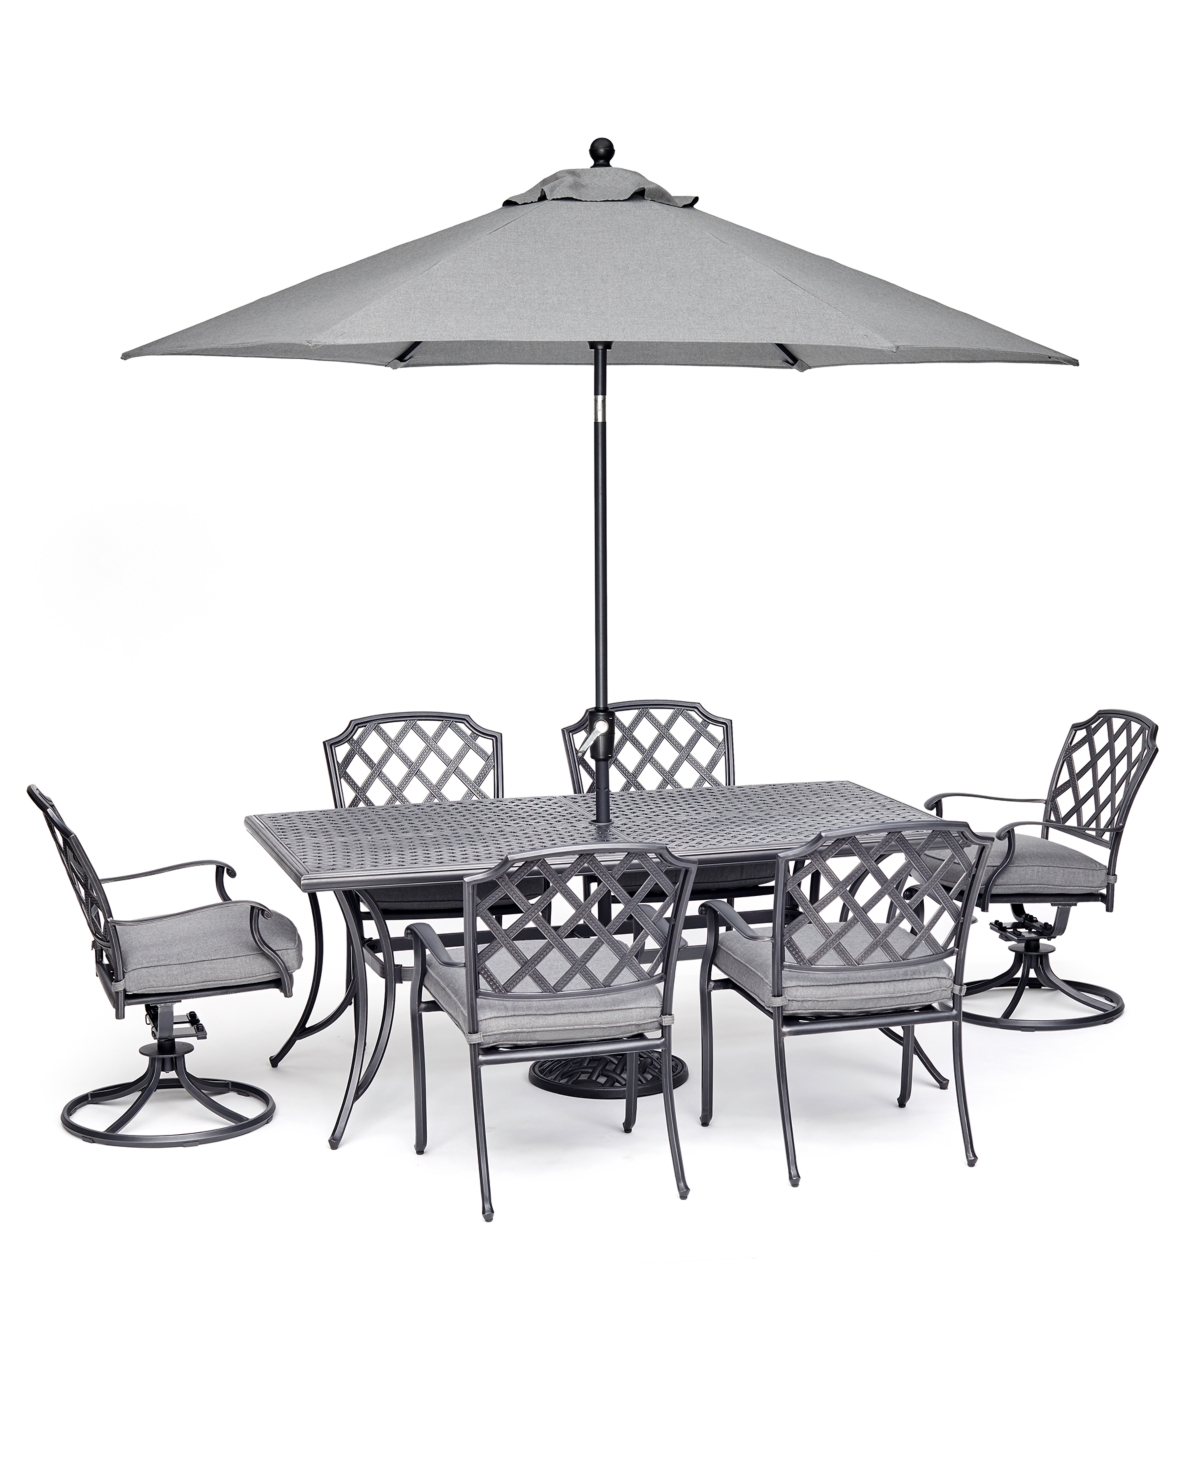 Vintage Ii Outdoor Cast Aluminum 7-Pc. Dining Set (72 X 38 Table, 4 Dining Chairs & 2 Swivel Chairs) With Sunbrella Cushions, Created for Macys